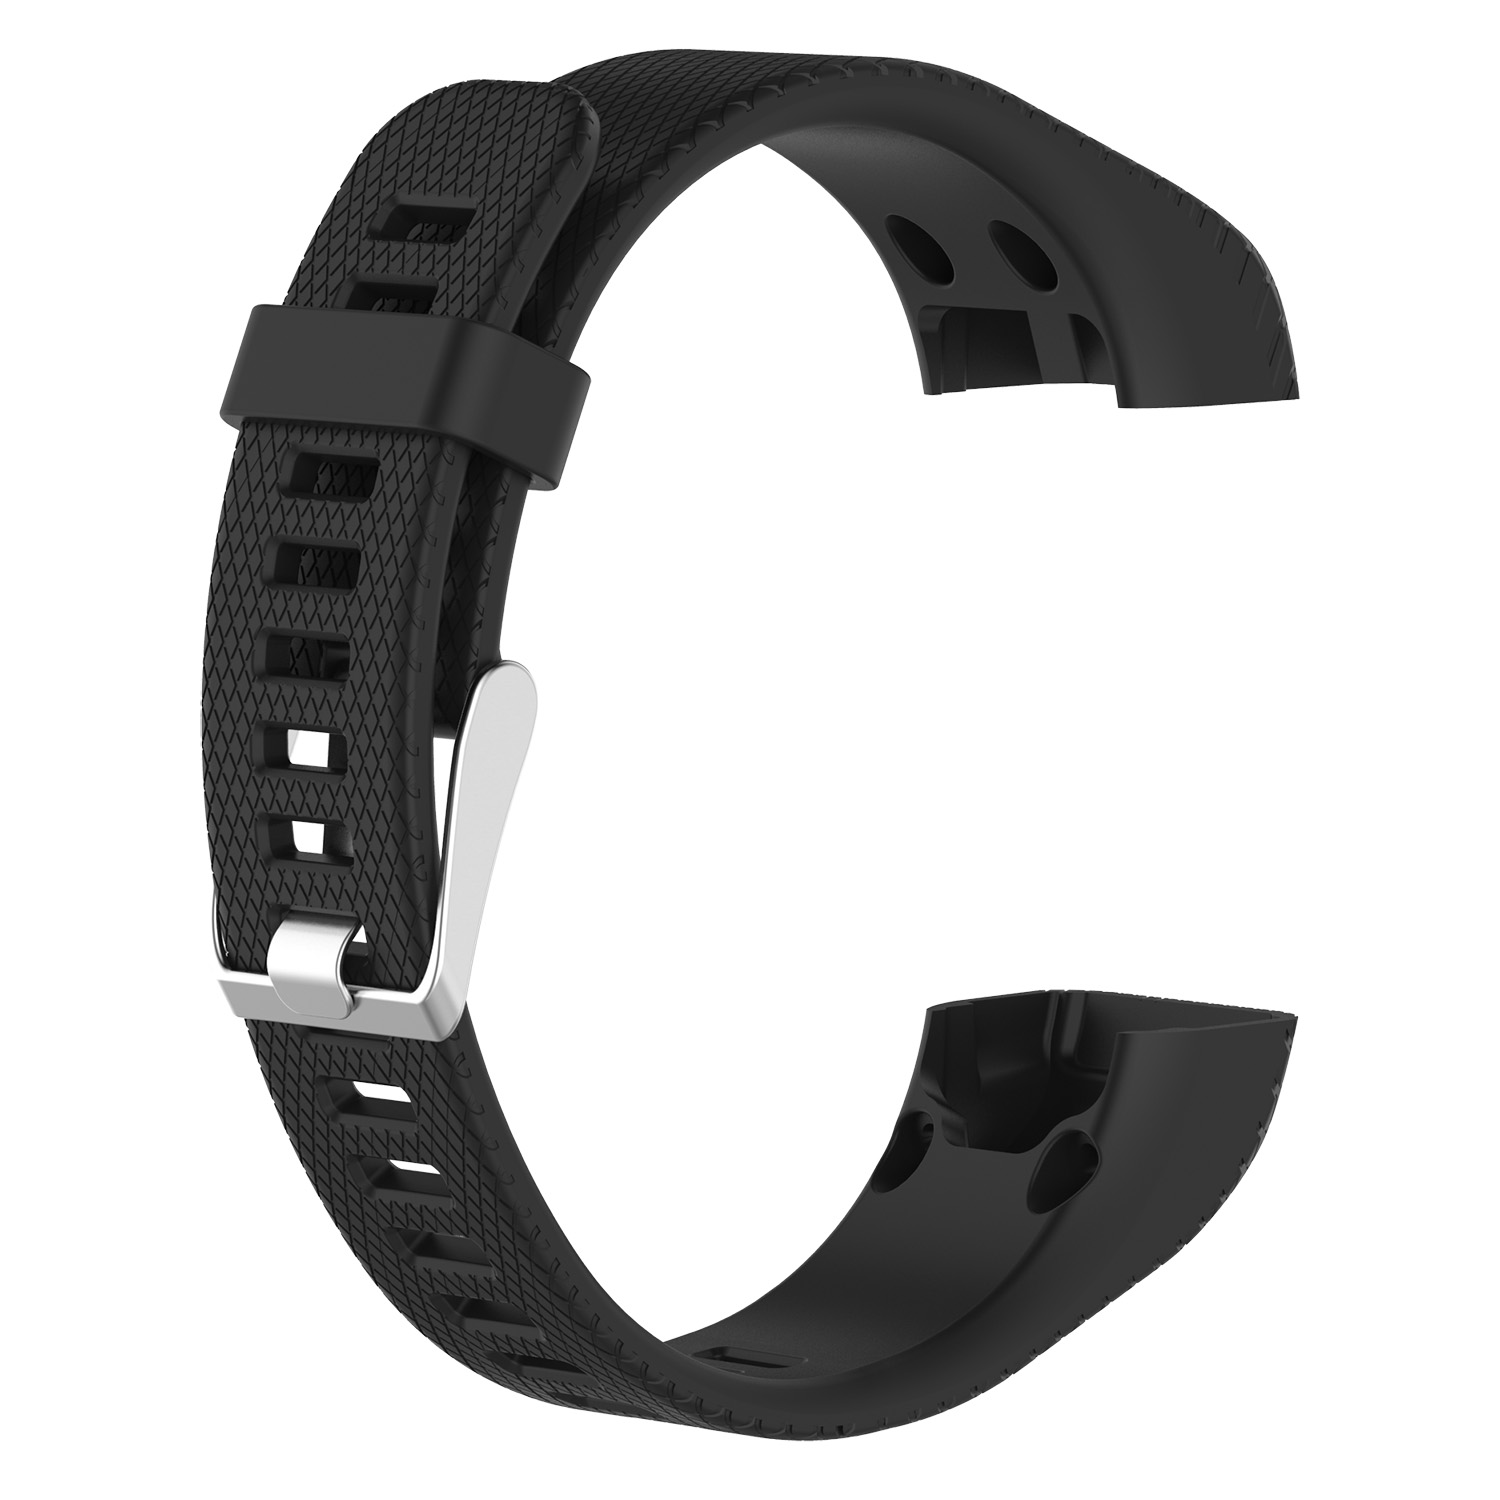 Bakeey-Texture-Silicone-Replacement-Strap-Smart-Watch-Band-For-Garmin-Vivosmart-HRApproach-X10X40-1739176-4